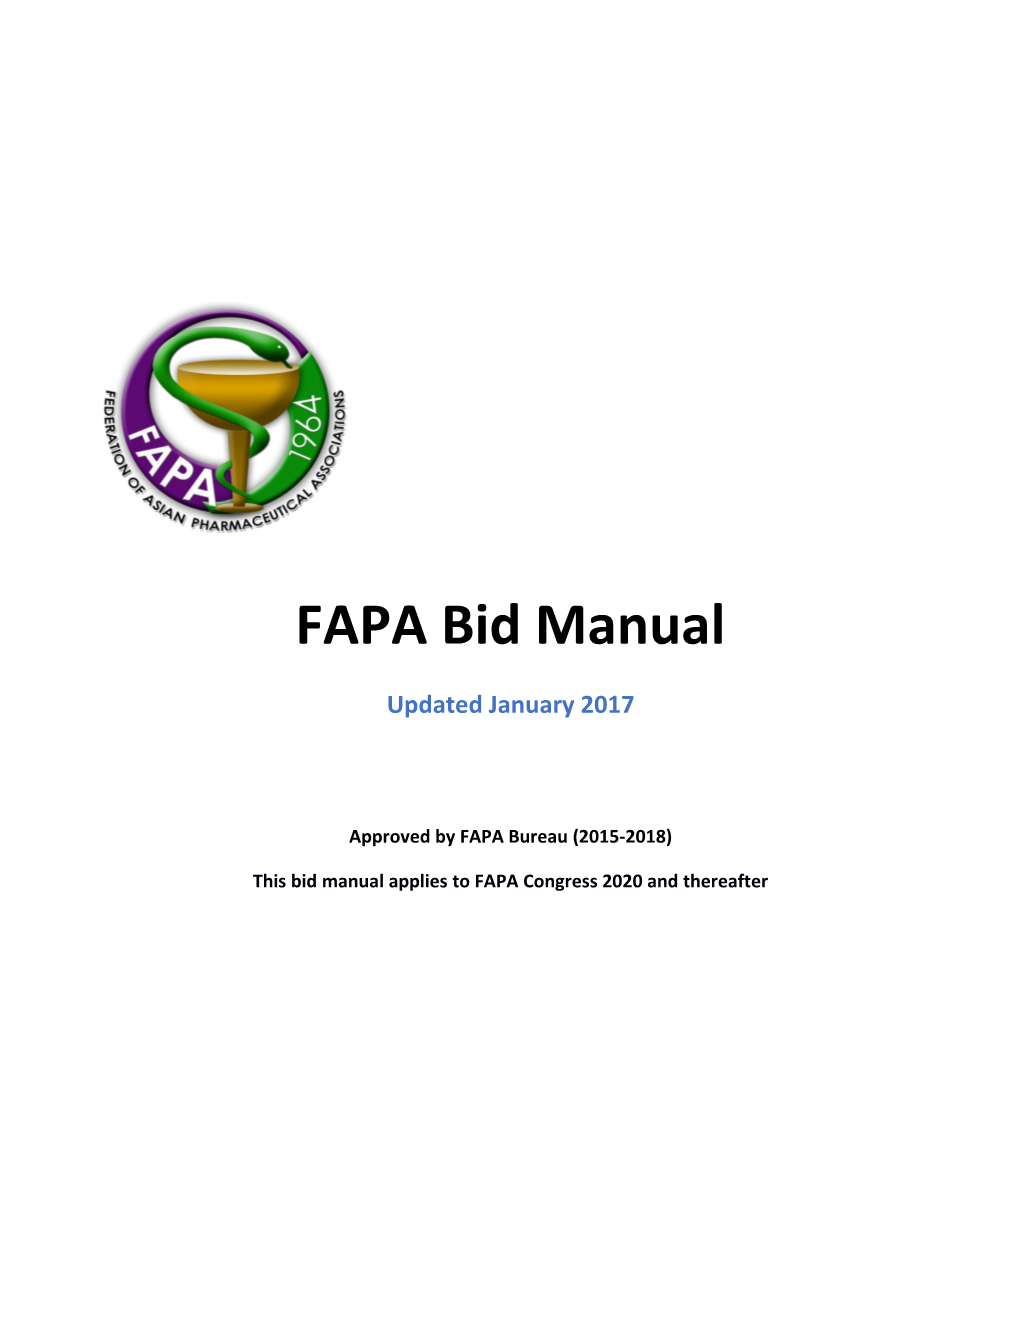 This Bid Manual Applies to FAPA Congress 2020 and Thereafter